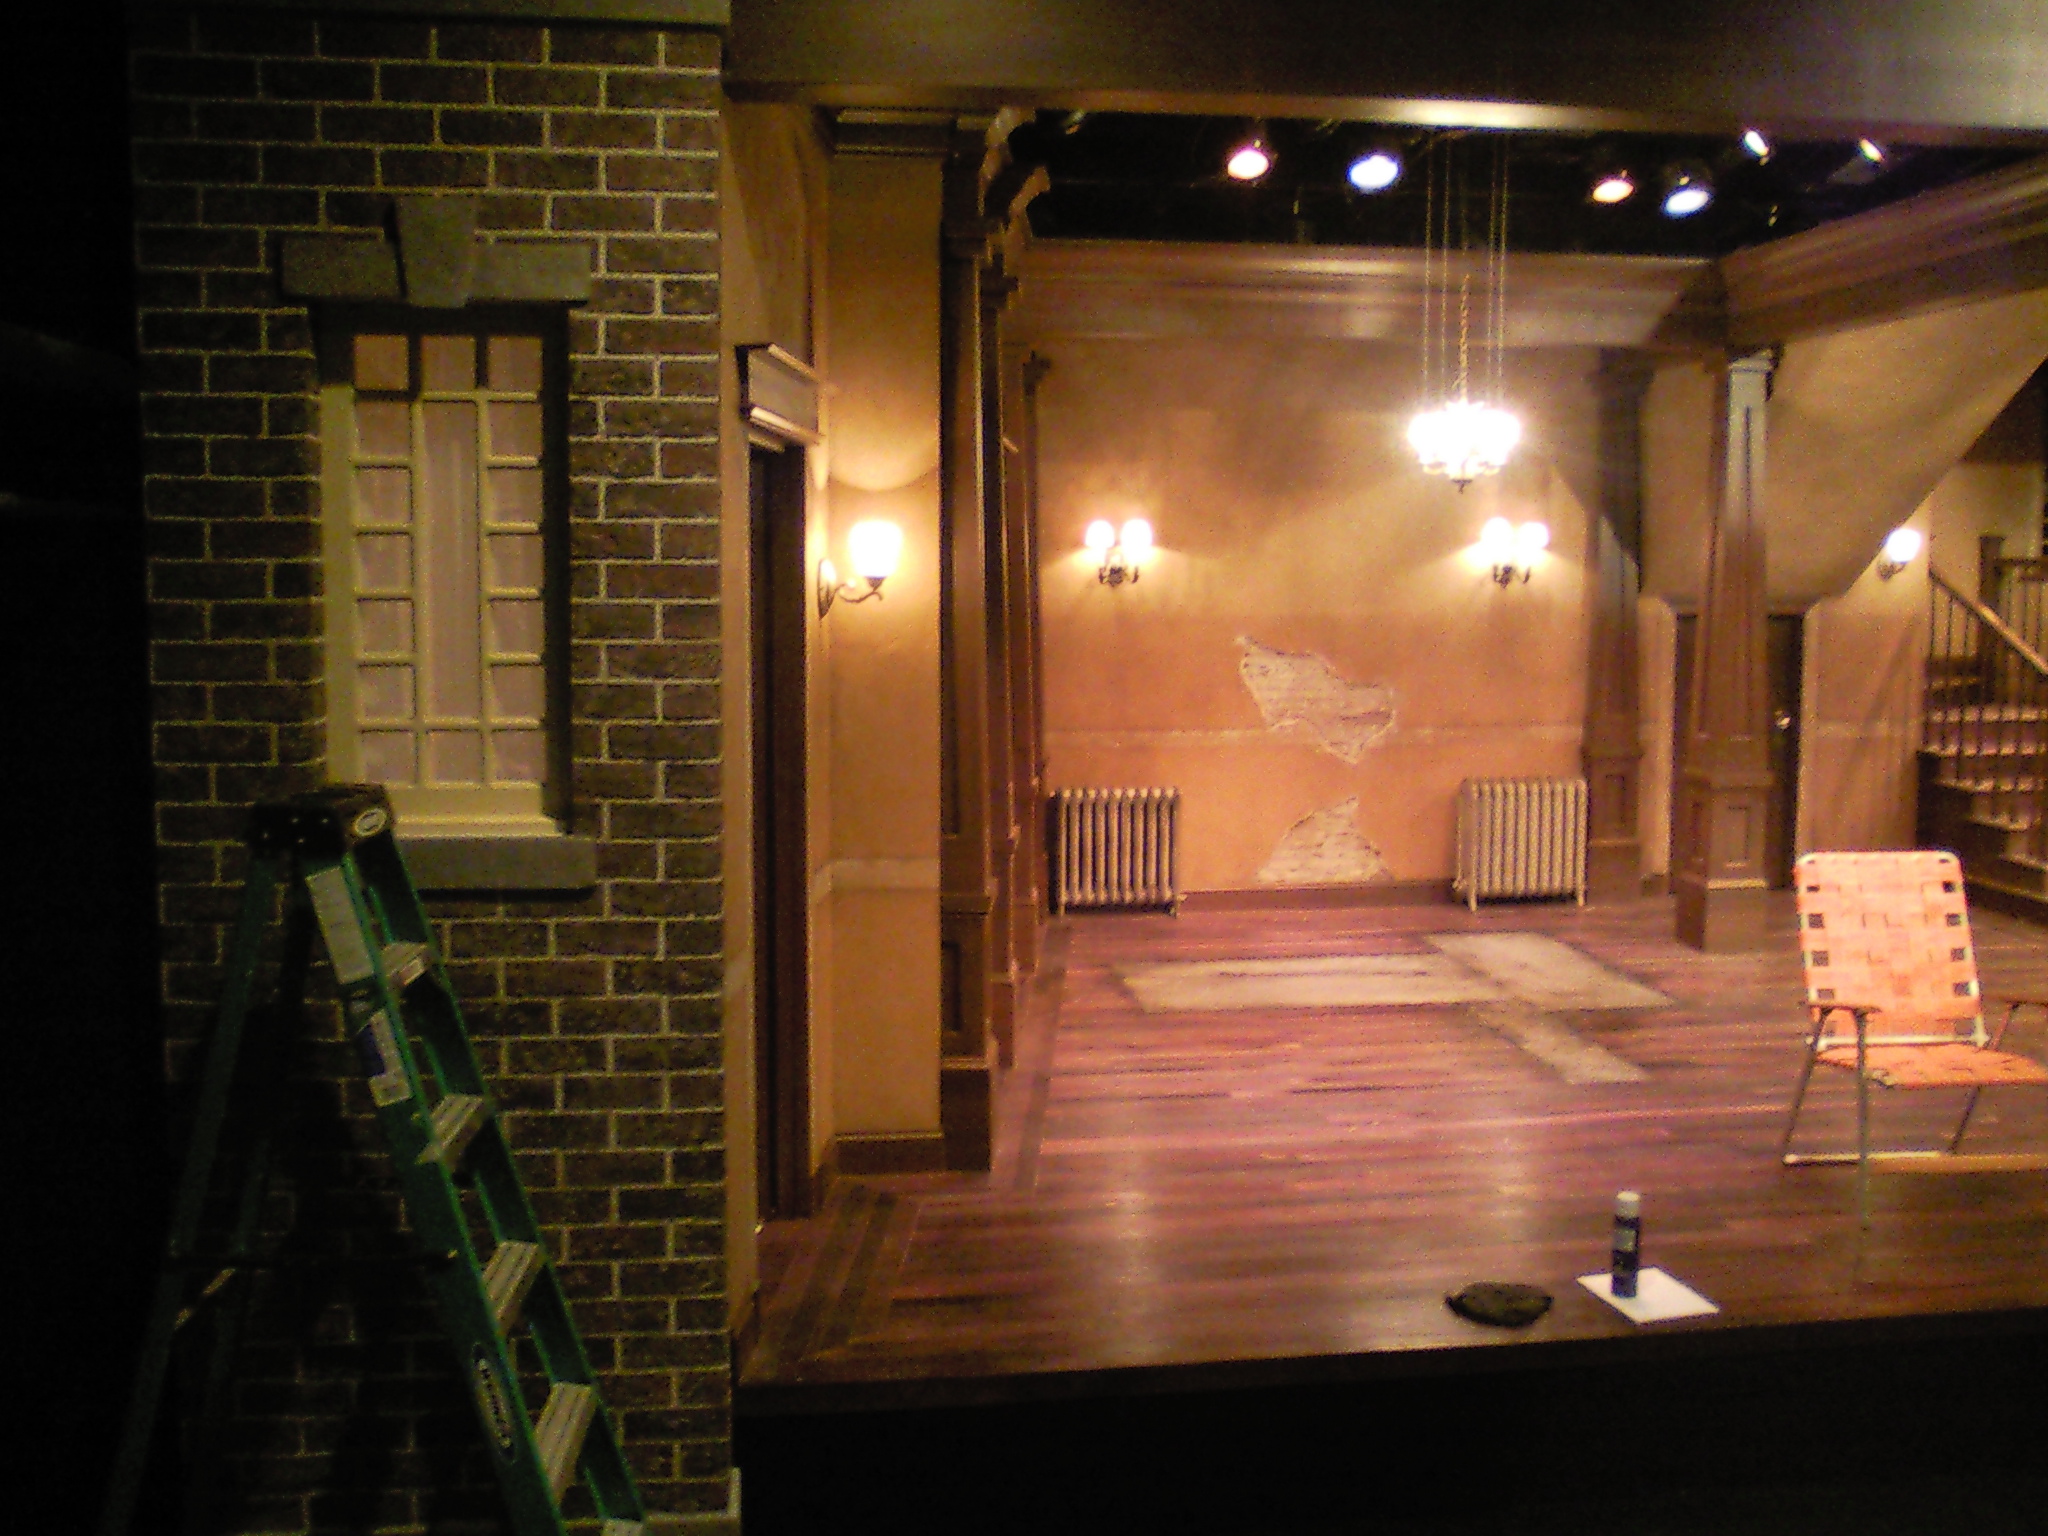   Clybourne Park  set under construction. &nbsp;This set had to time travel decades between acts, so all fixtures and molding were removable. 